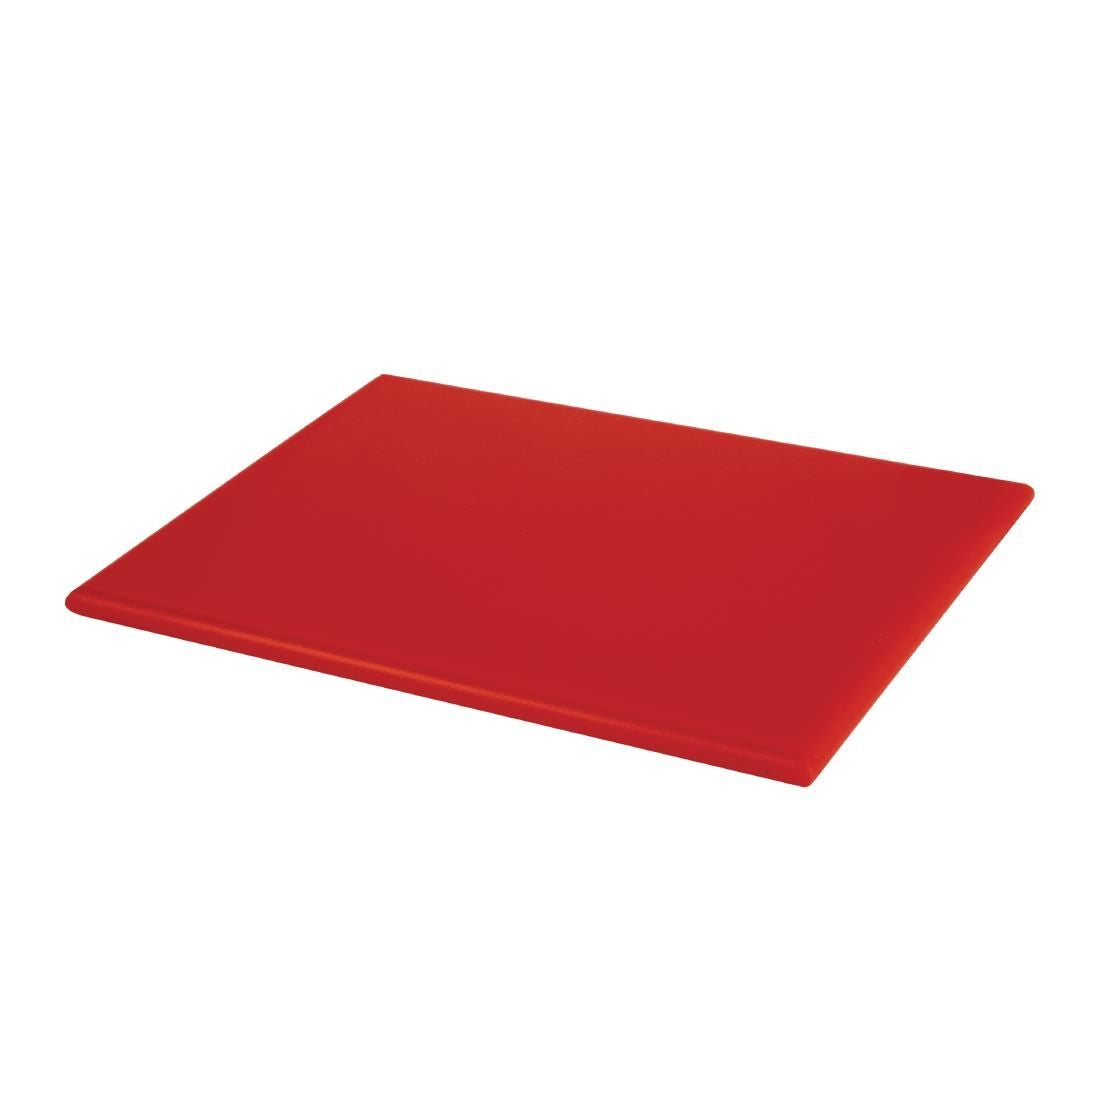 Hygiplas High Density Red Chopping Board Small JD Catering Equipment Solutions Ltd